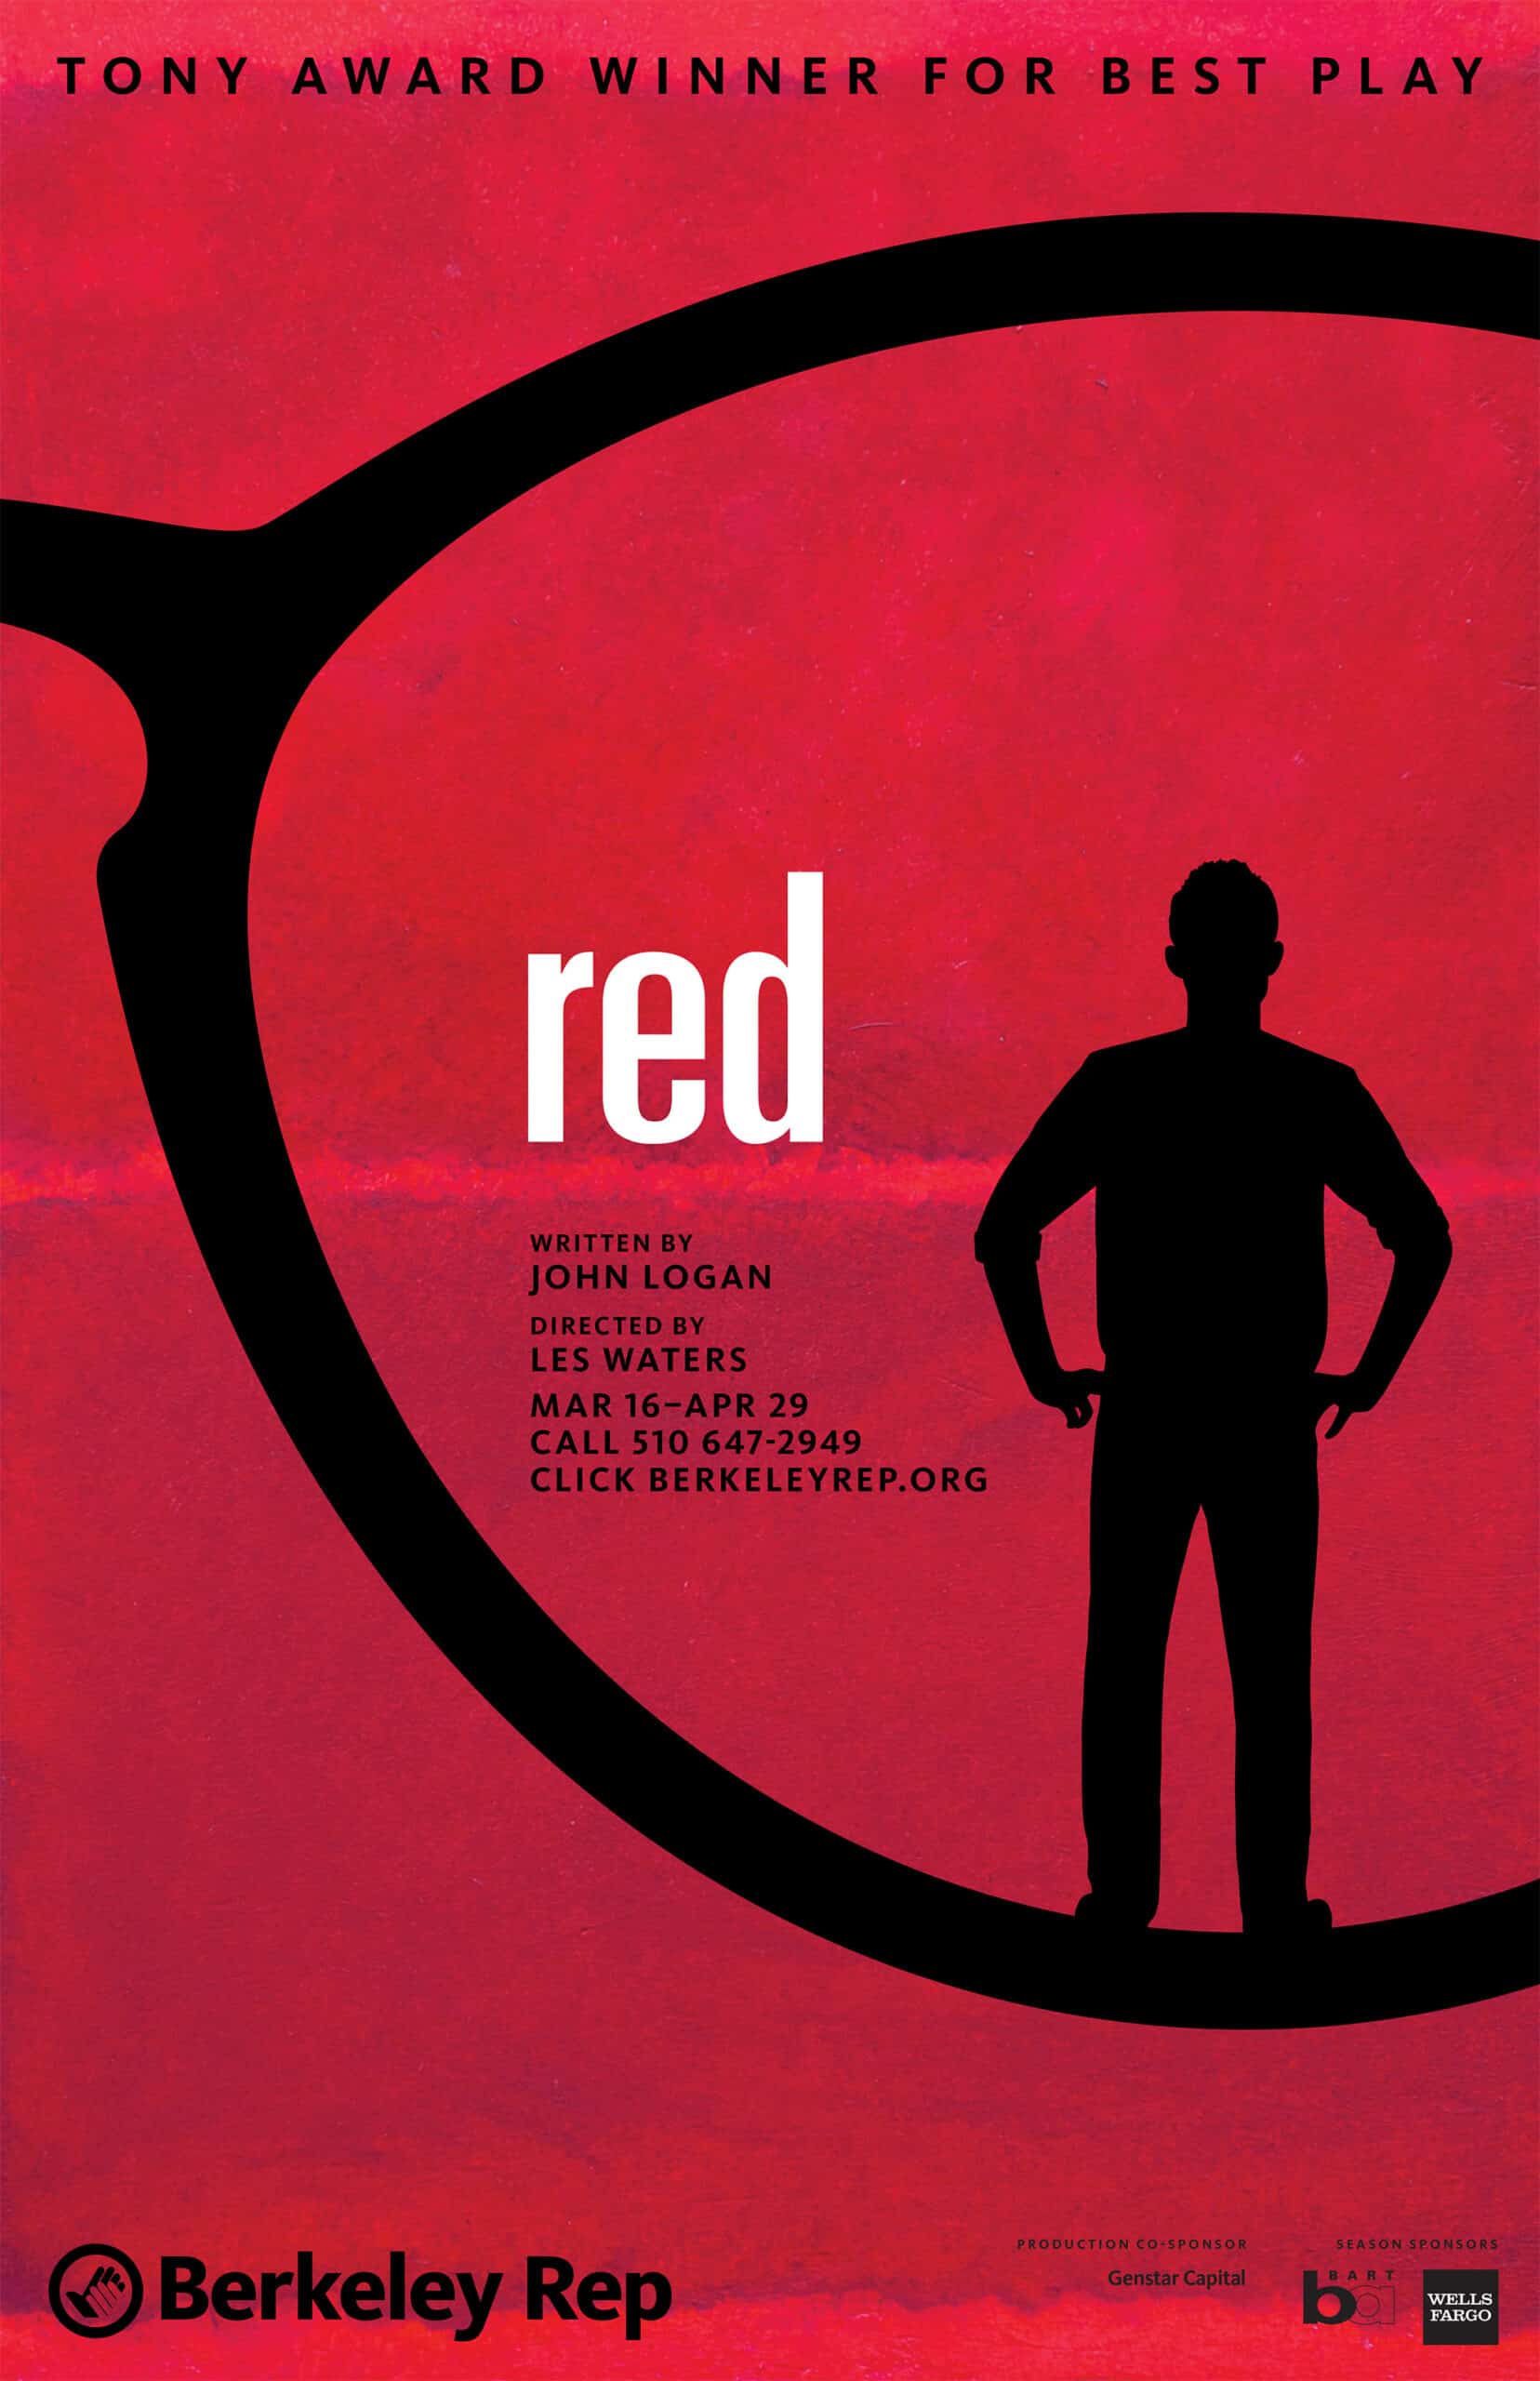 Poster for John Logan's "Red" at Berkeley Rep. The background image is a red painting in the style of Mark Rothko. The foreground is an extreme closeup of a simplified silhouette section of eyeglasses like those worn by Rothko. A small man in silhouette stands inside the lens, his feet on the bottom rim of the lens. The image represents the younger artist dominated by the gigantic presence of Rothko.